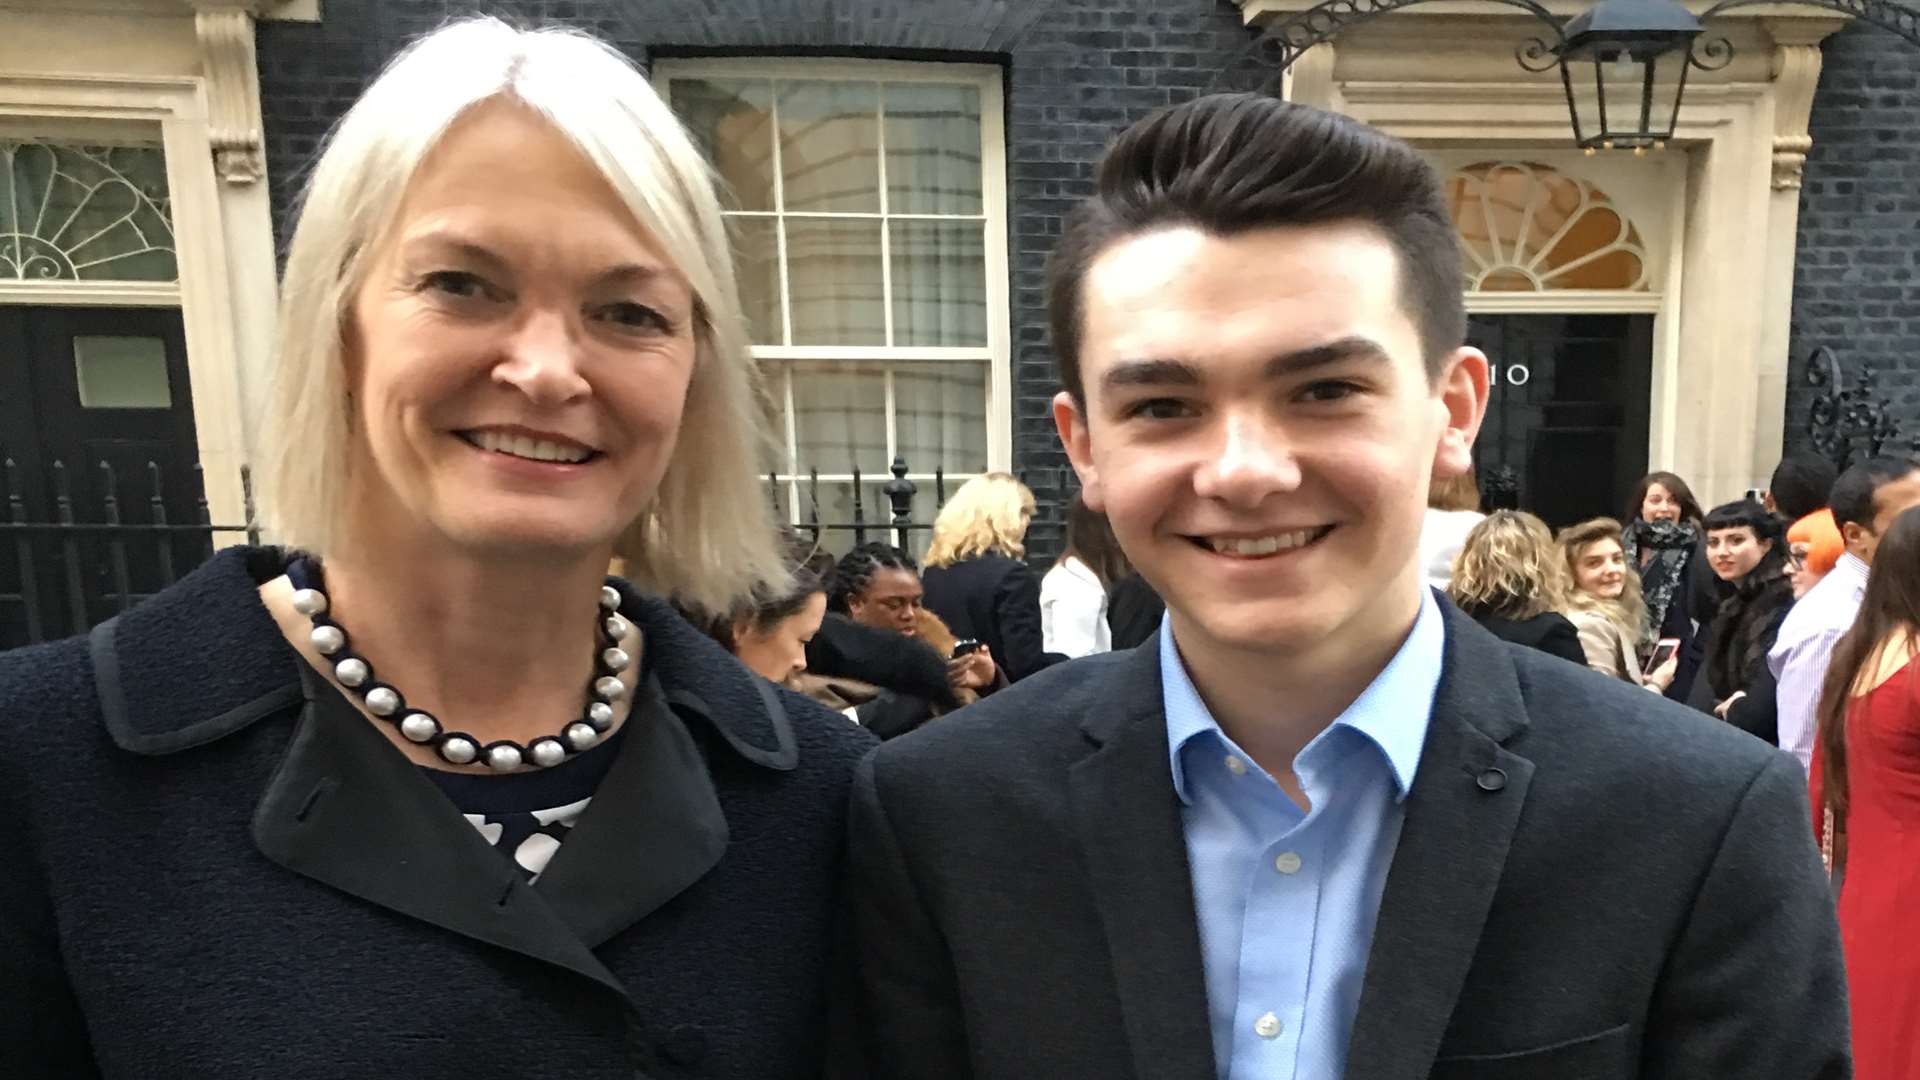 Ben Towers with Small Business Minister Margot James